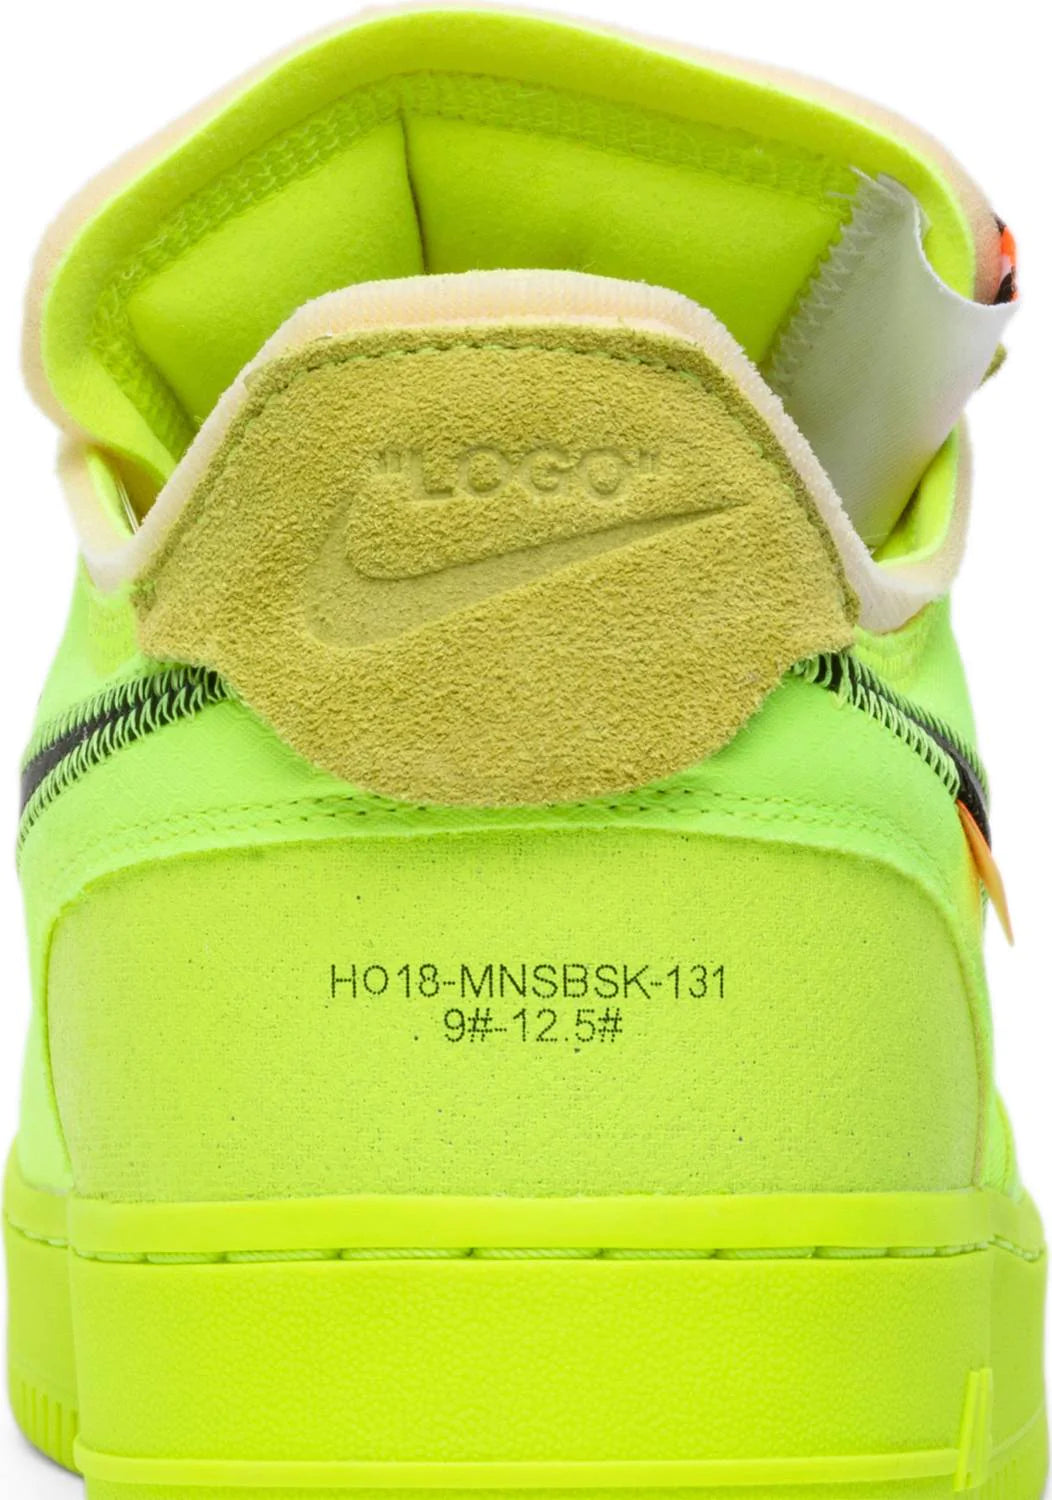 OFF-WHITE x Air Force 1 Low 'Volt'